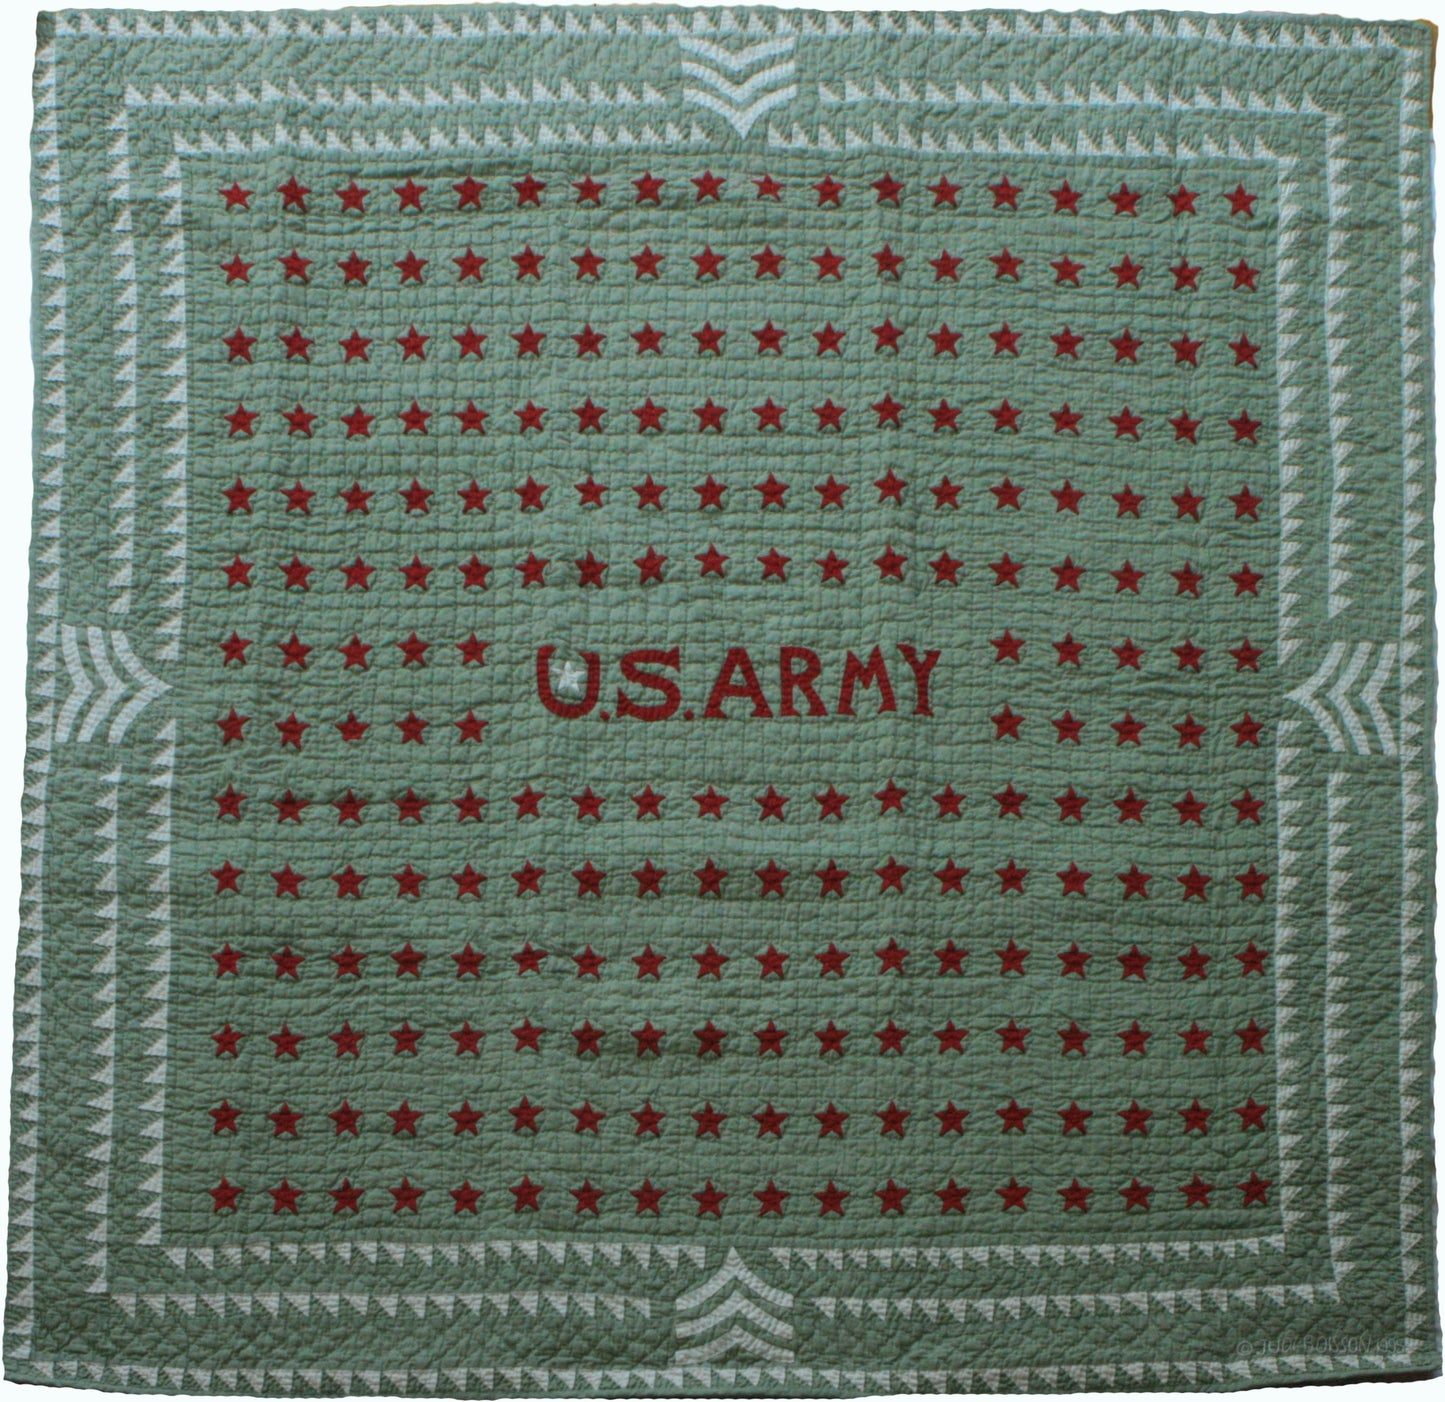 "U.S. Army Stars" in Sage Cover-Up Quilt 57" x 57"